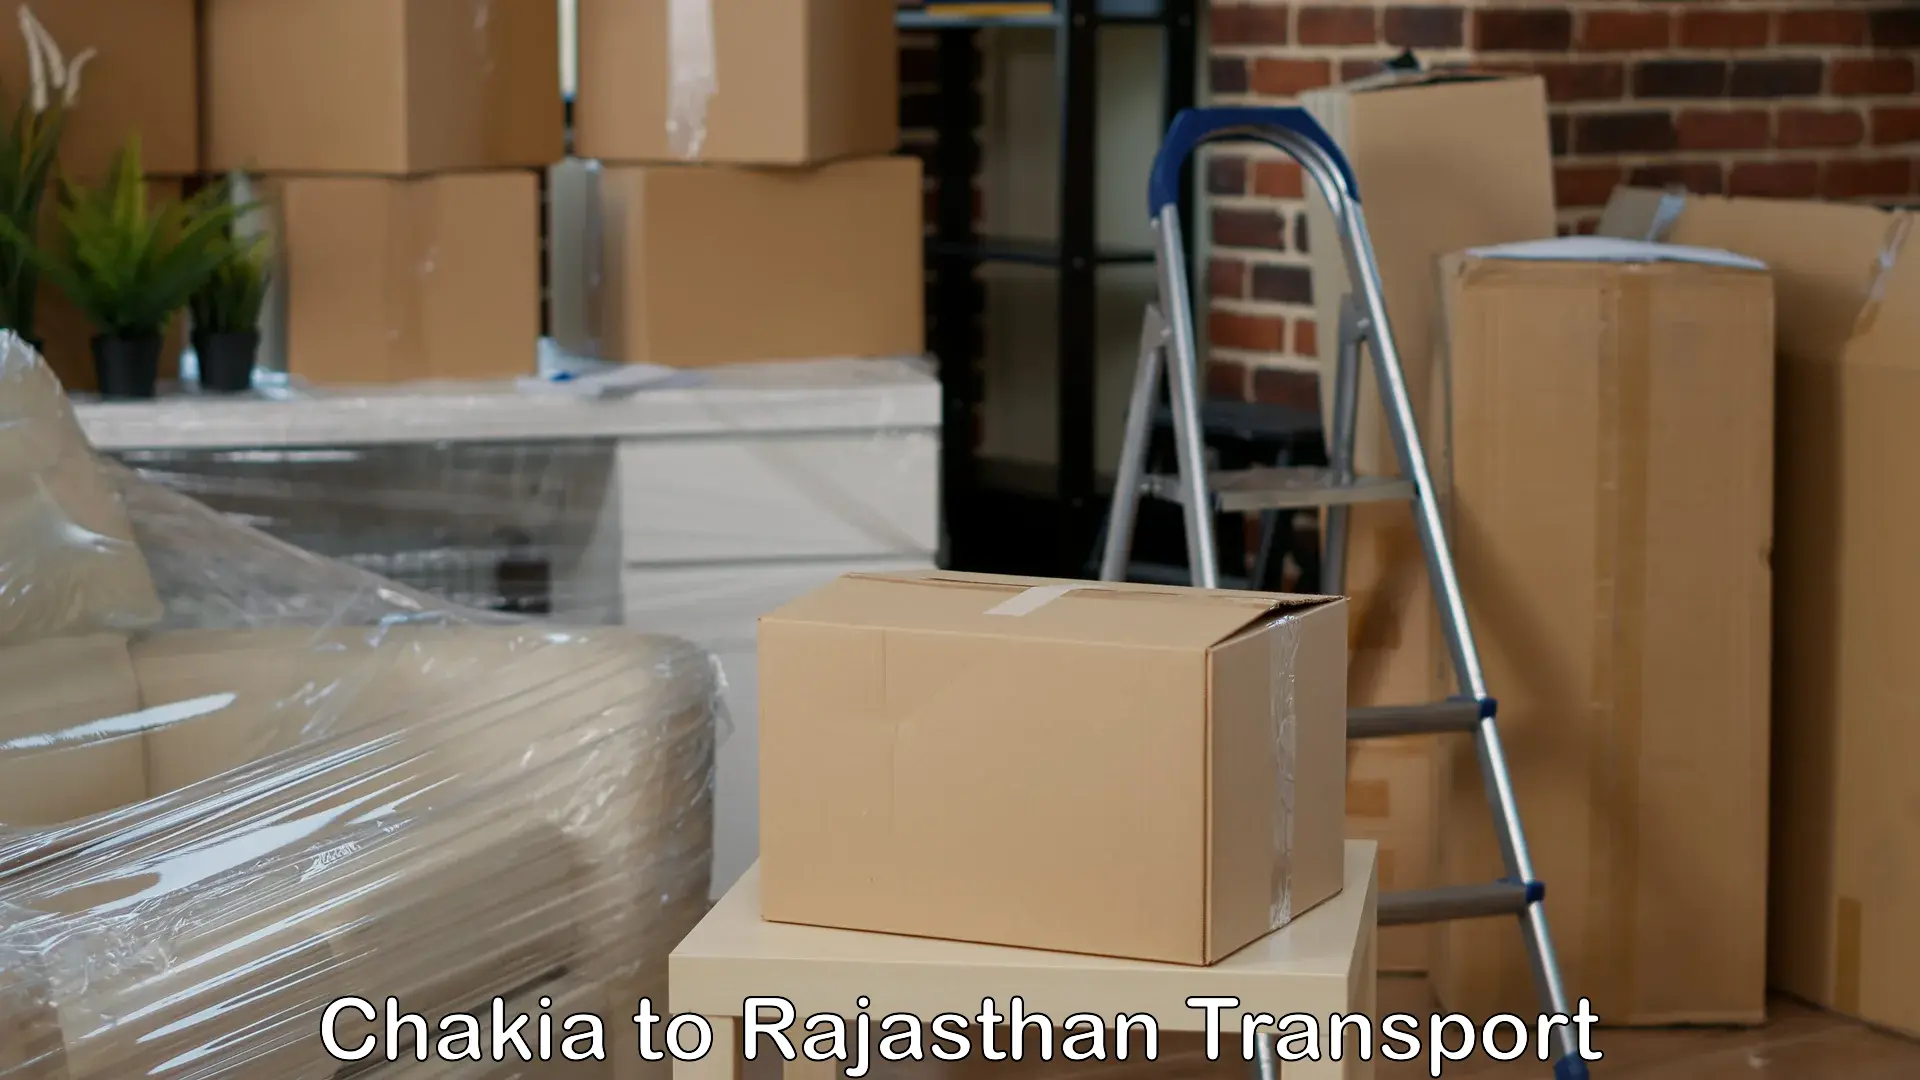 Cargo transport services Chakia to Dholpur